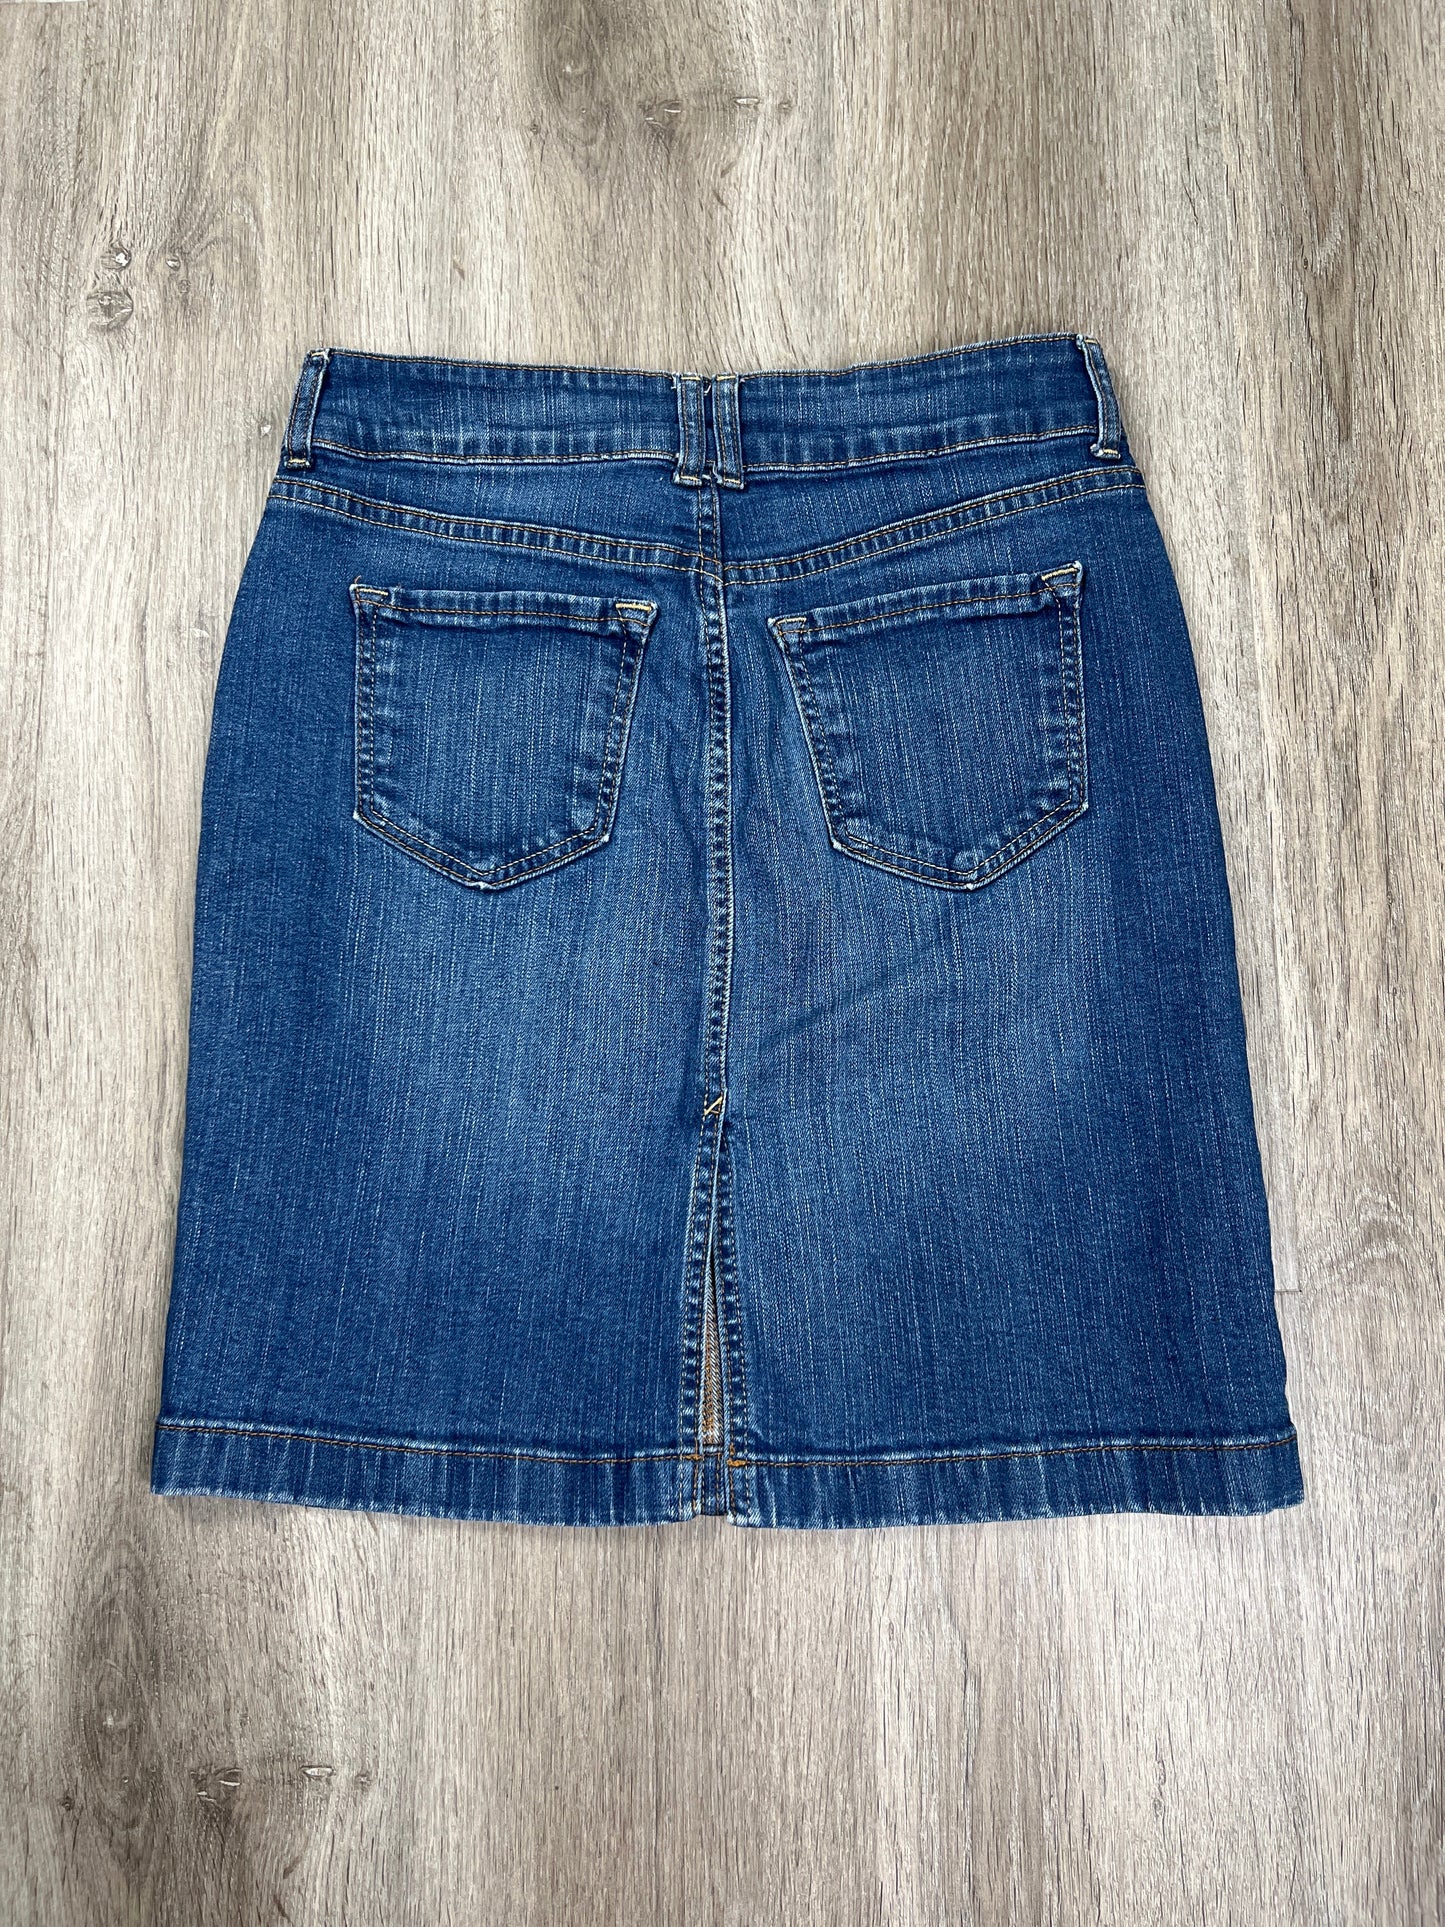 Skirt Mini & Short By Old Navy  Size: Xs